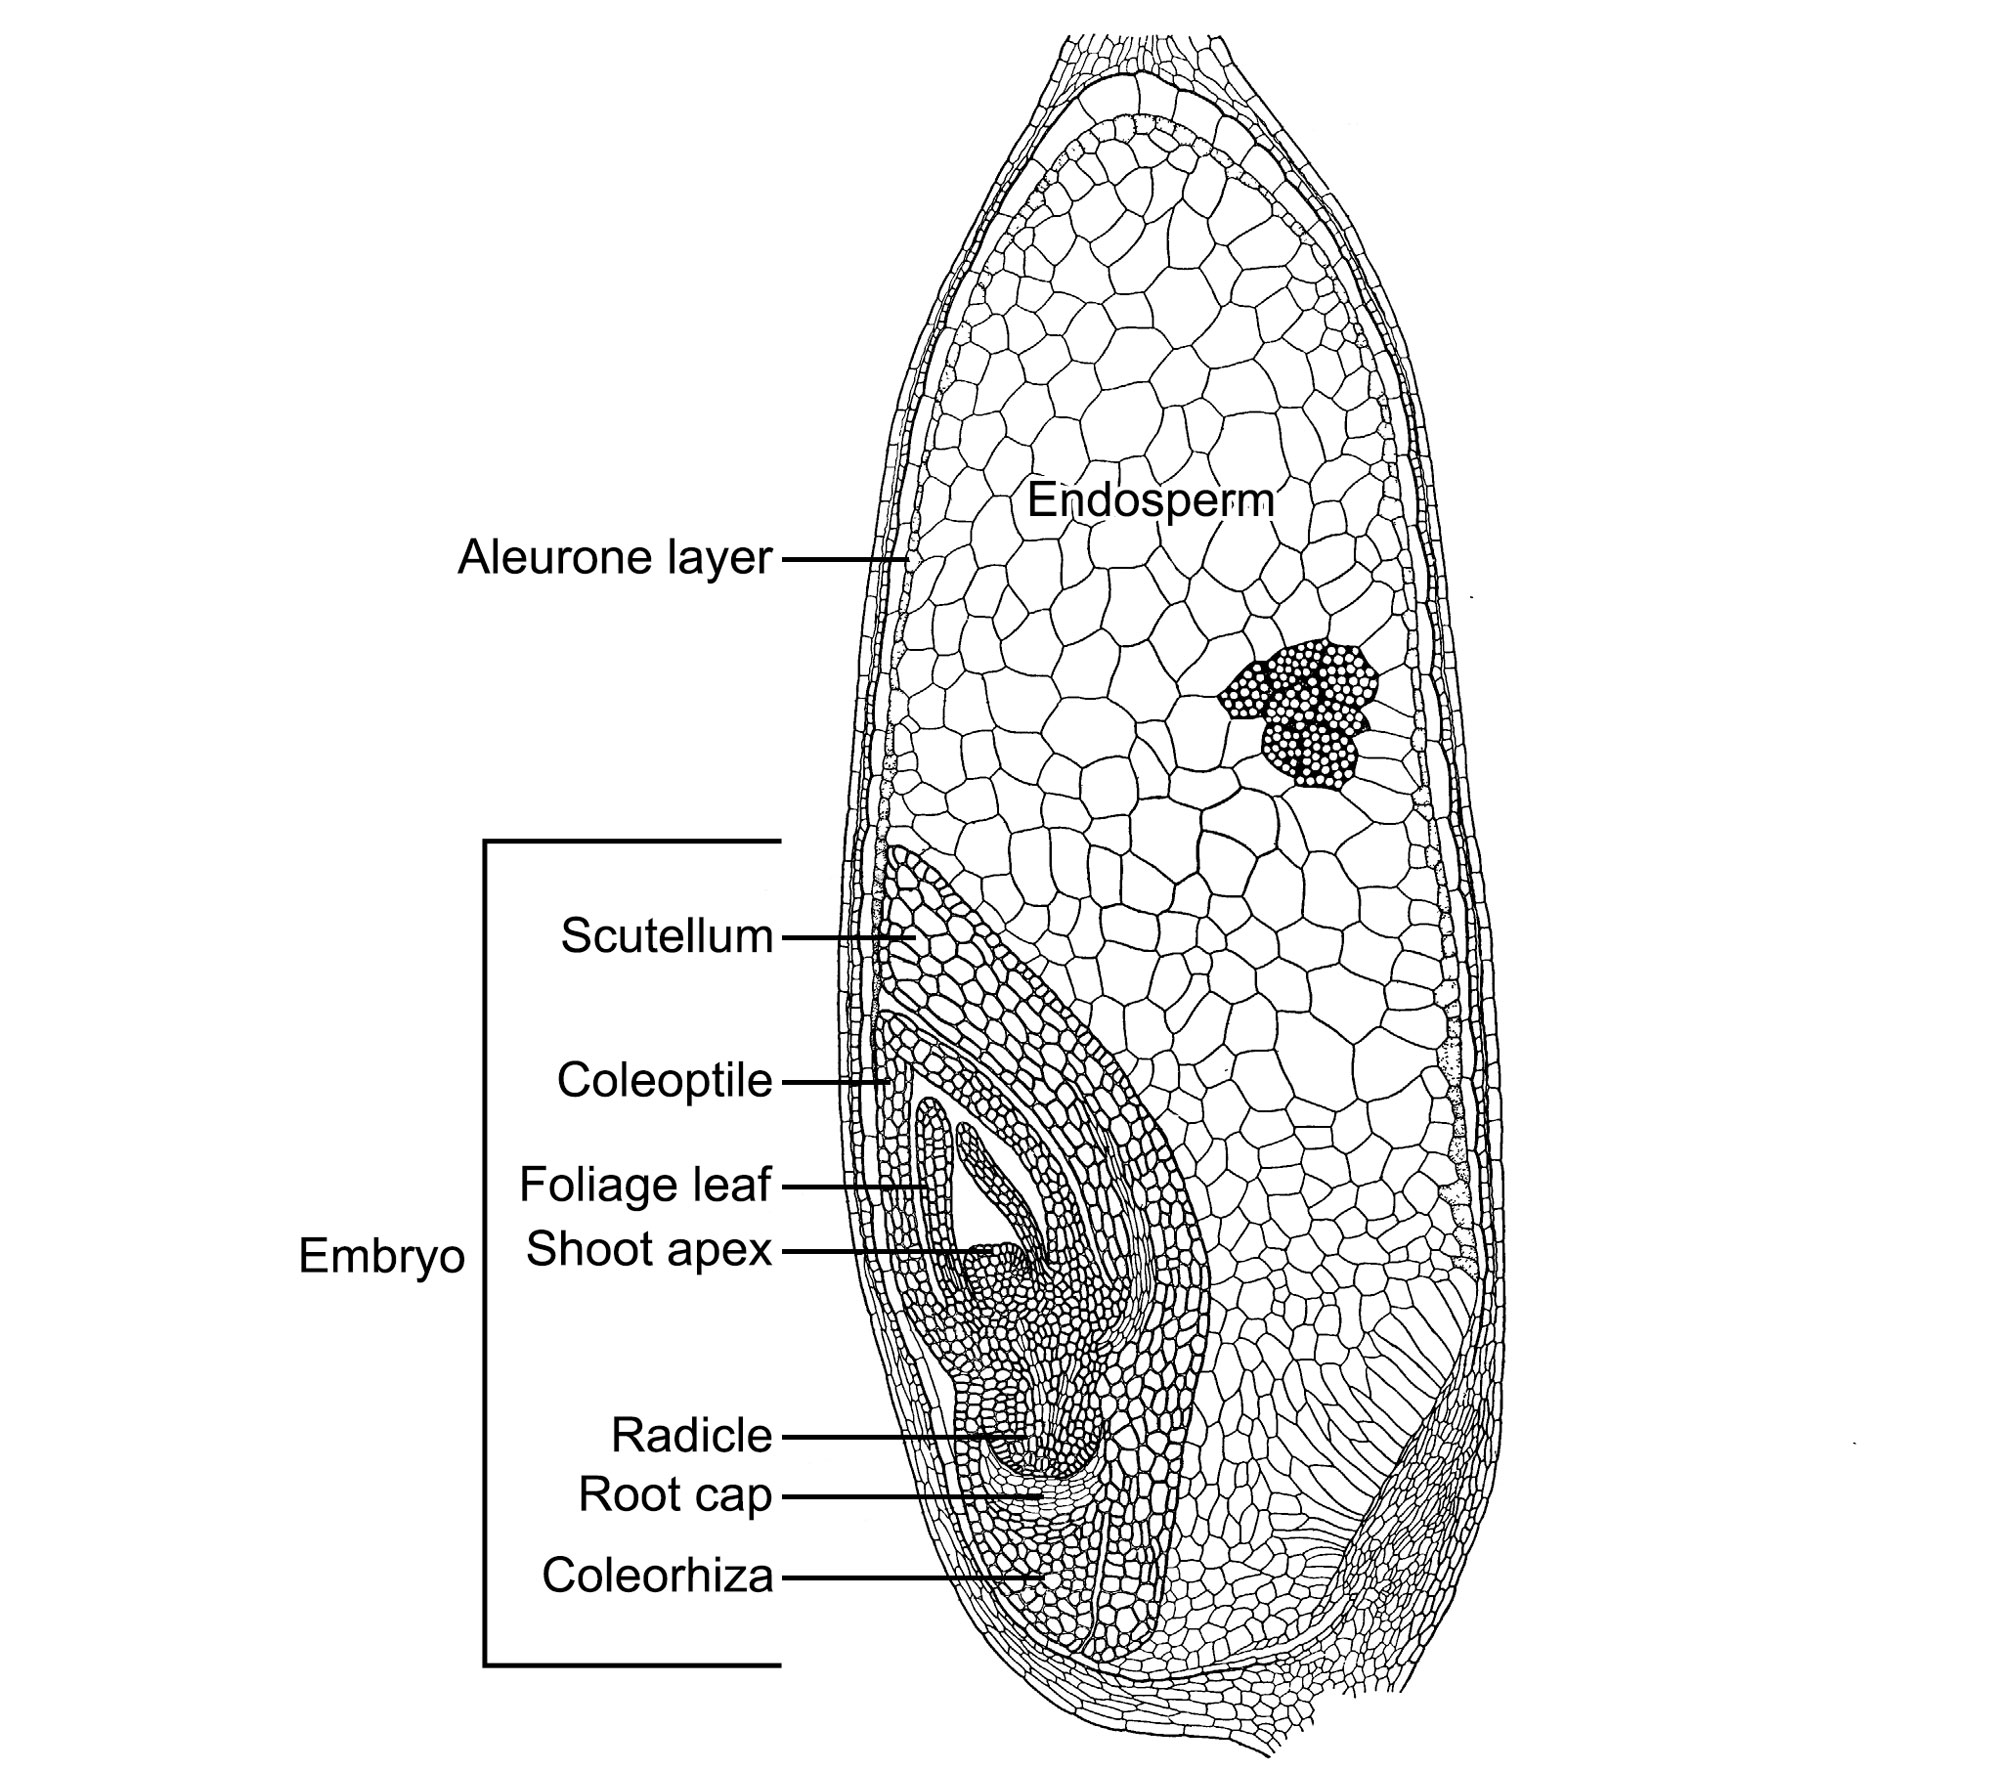 Drawing of a longitudinal section of sugarcane caryopsis or grain. The drawing shows an oval grain with an embryo in the lower left and the remainder of the grain taken up by endosperm. The embryo includes the following labeled parts: scutellum, coleoptile, foliage leaf, shoot apex, radicle, root cap, and coleorhiza. The aleurone layer is a single layer of cells surrounding the remainder of the endosperm.